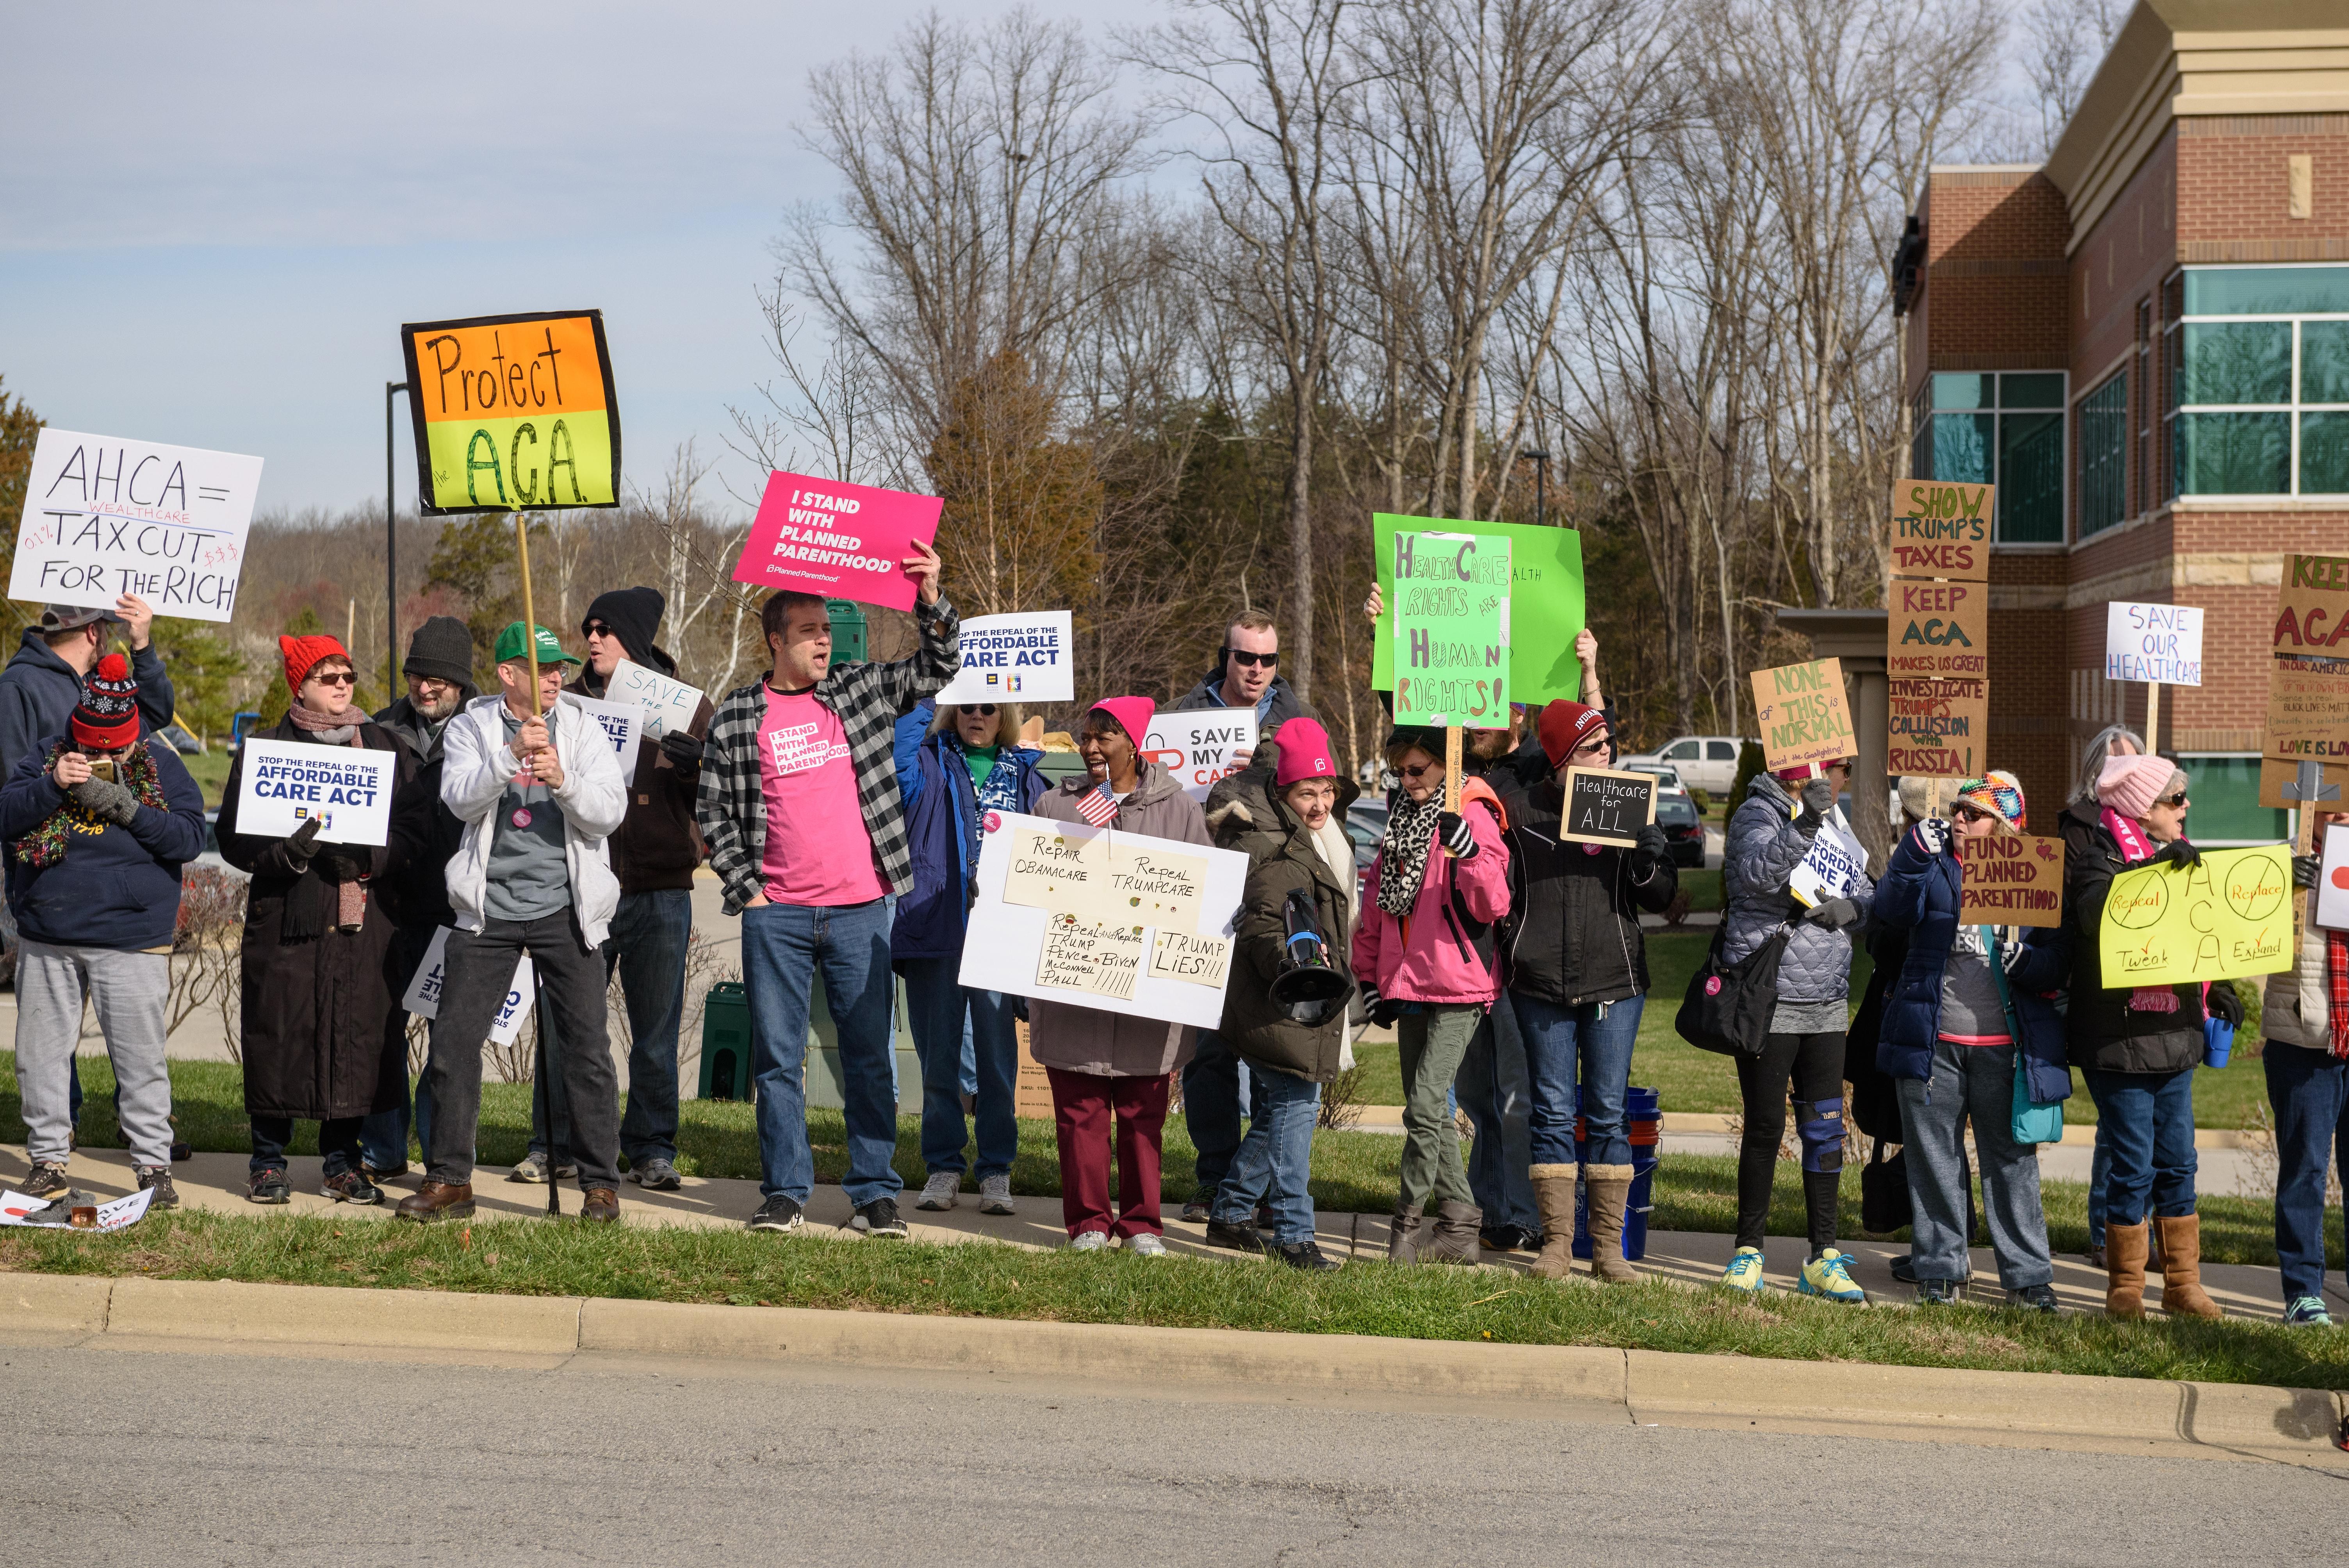 Protesters find their place along Plantside Drive for the arival of Vice President Pence. - BRIAN BOHANNON